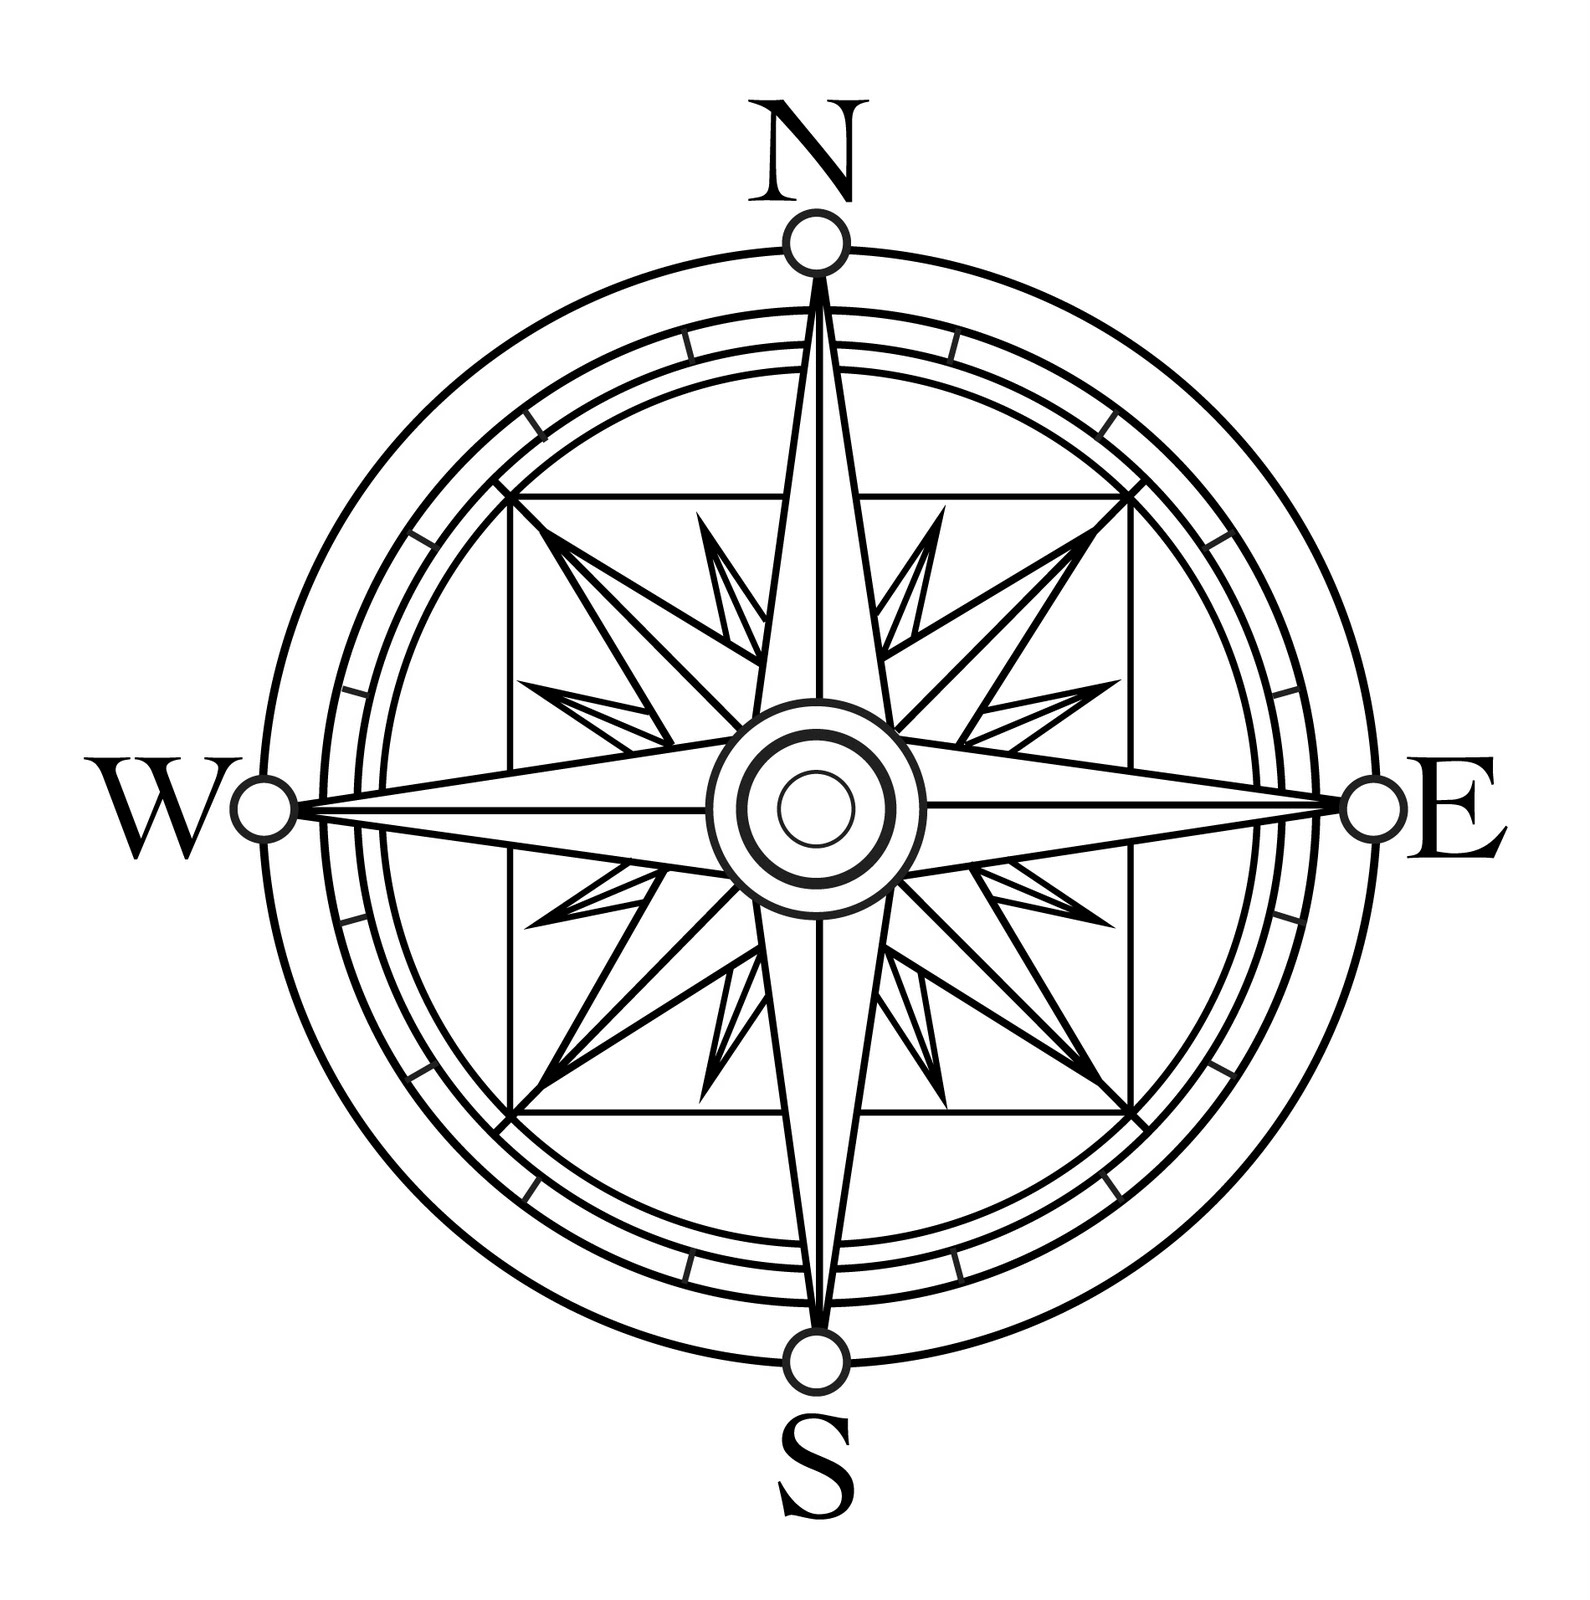 7 Best Images of Free Printable Compass - Compass Rose Free ...